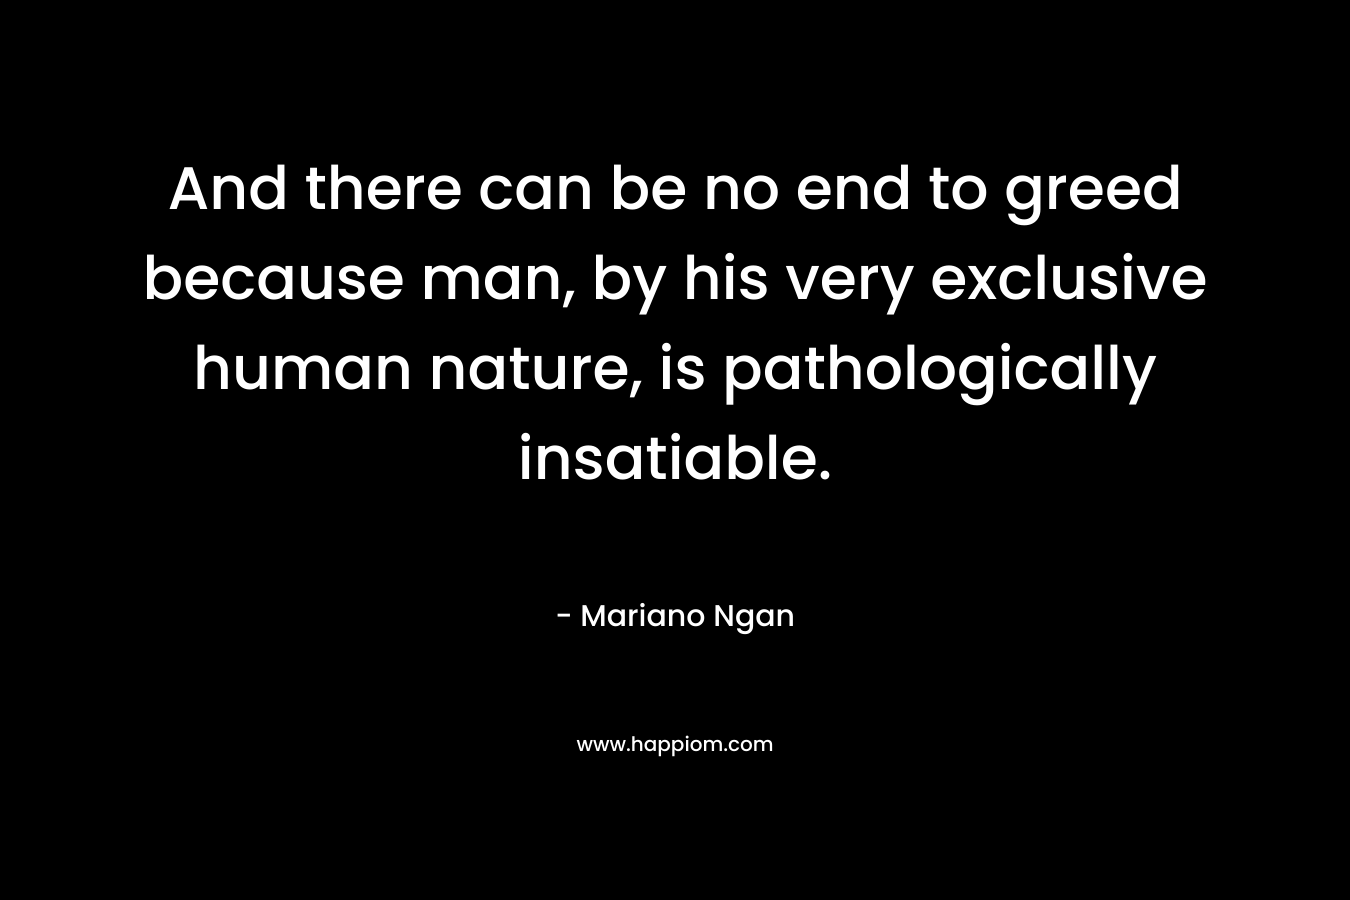 And there can be no end to greed because man, by his very exclusive human nature, is pathologically insatiable.